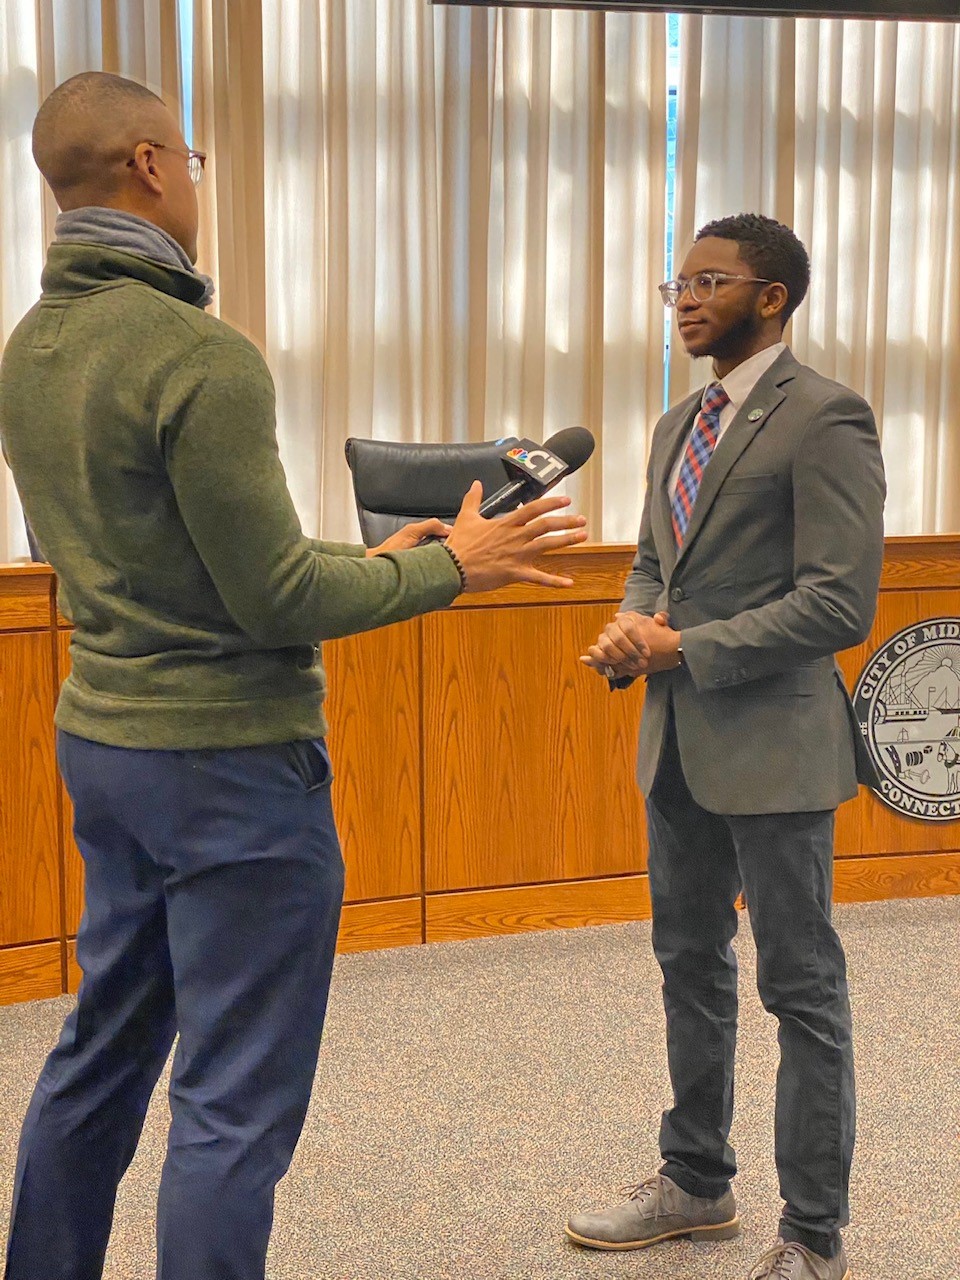 Be The Change: An Interview With Middletown City Councilman Ed Ford Jr.